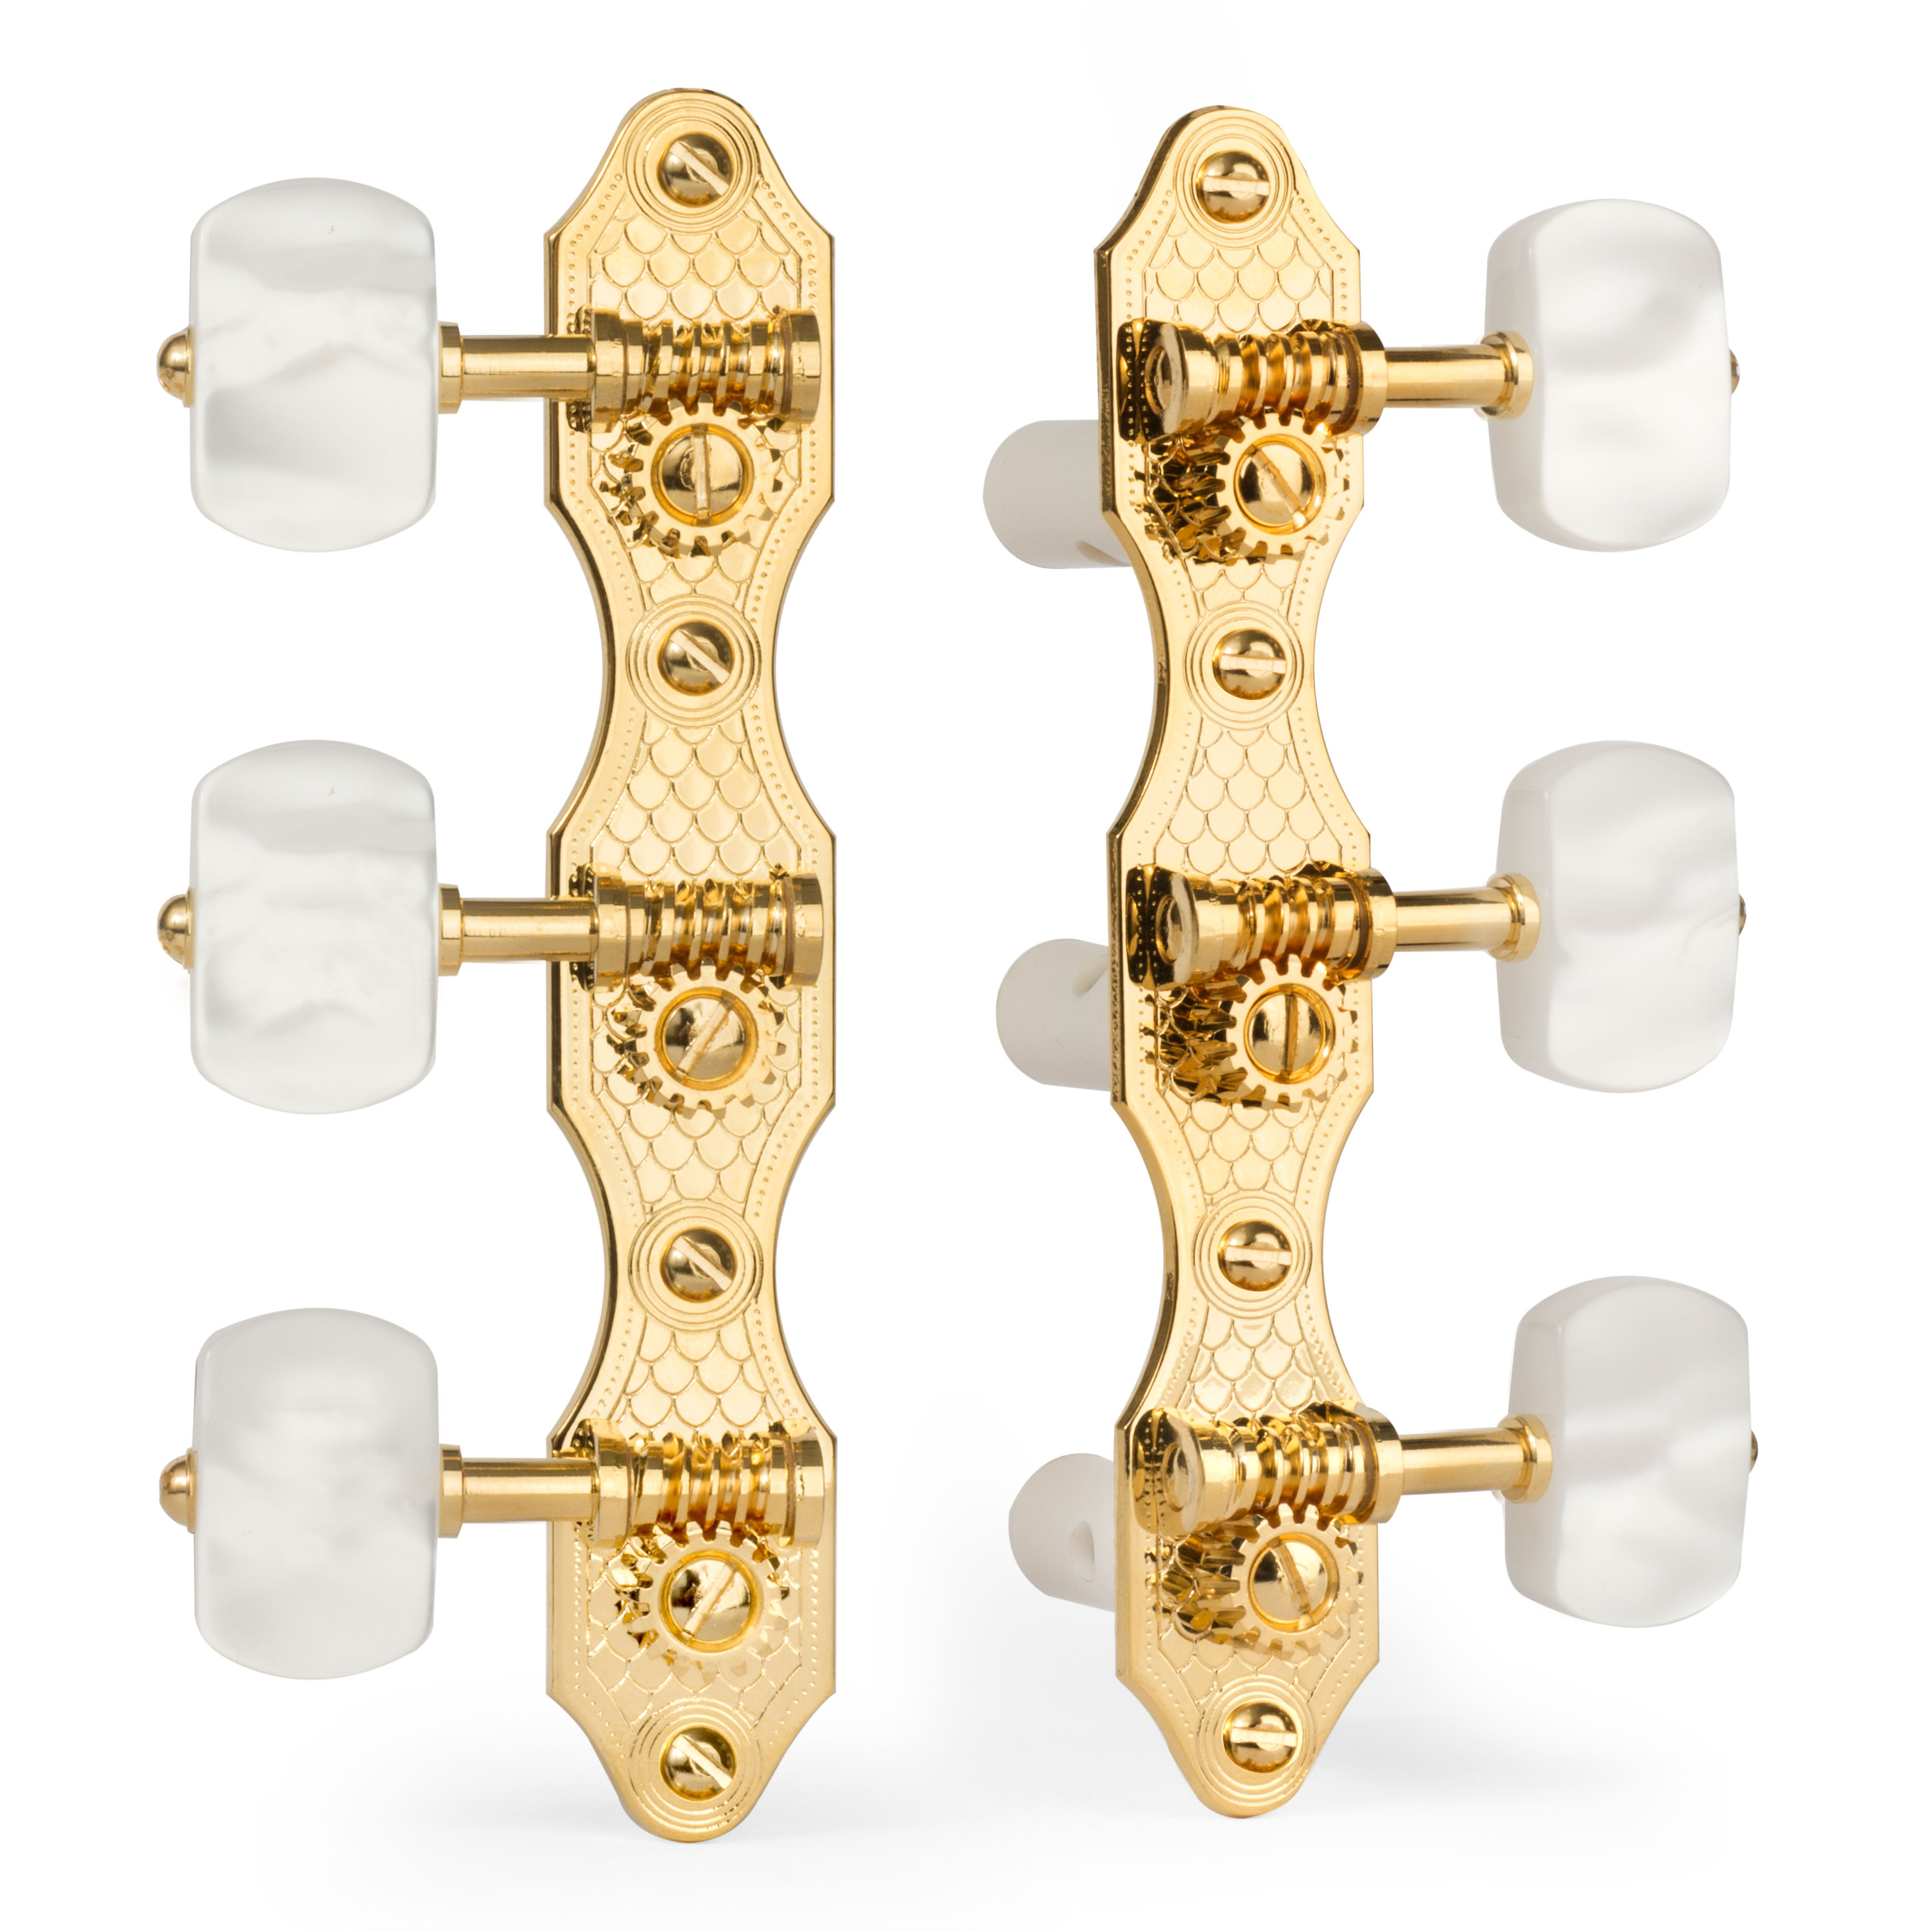 3+3 - Nickel Golden Gate F-2853 Vintage Classical Guitar Tuners 2 Planks 